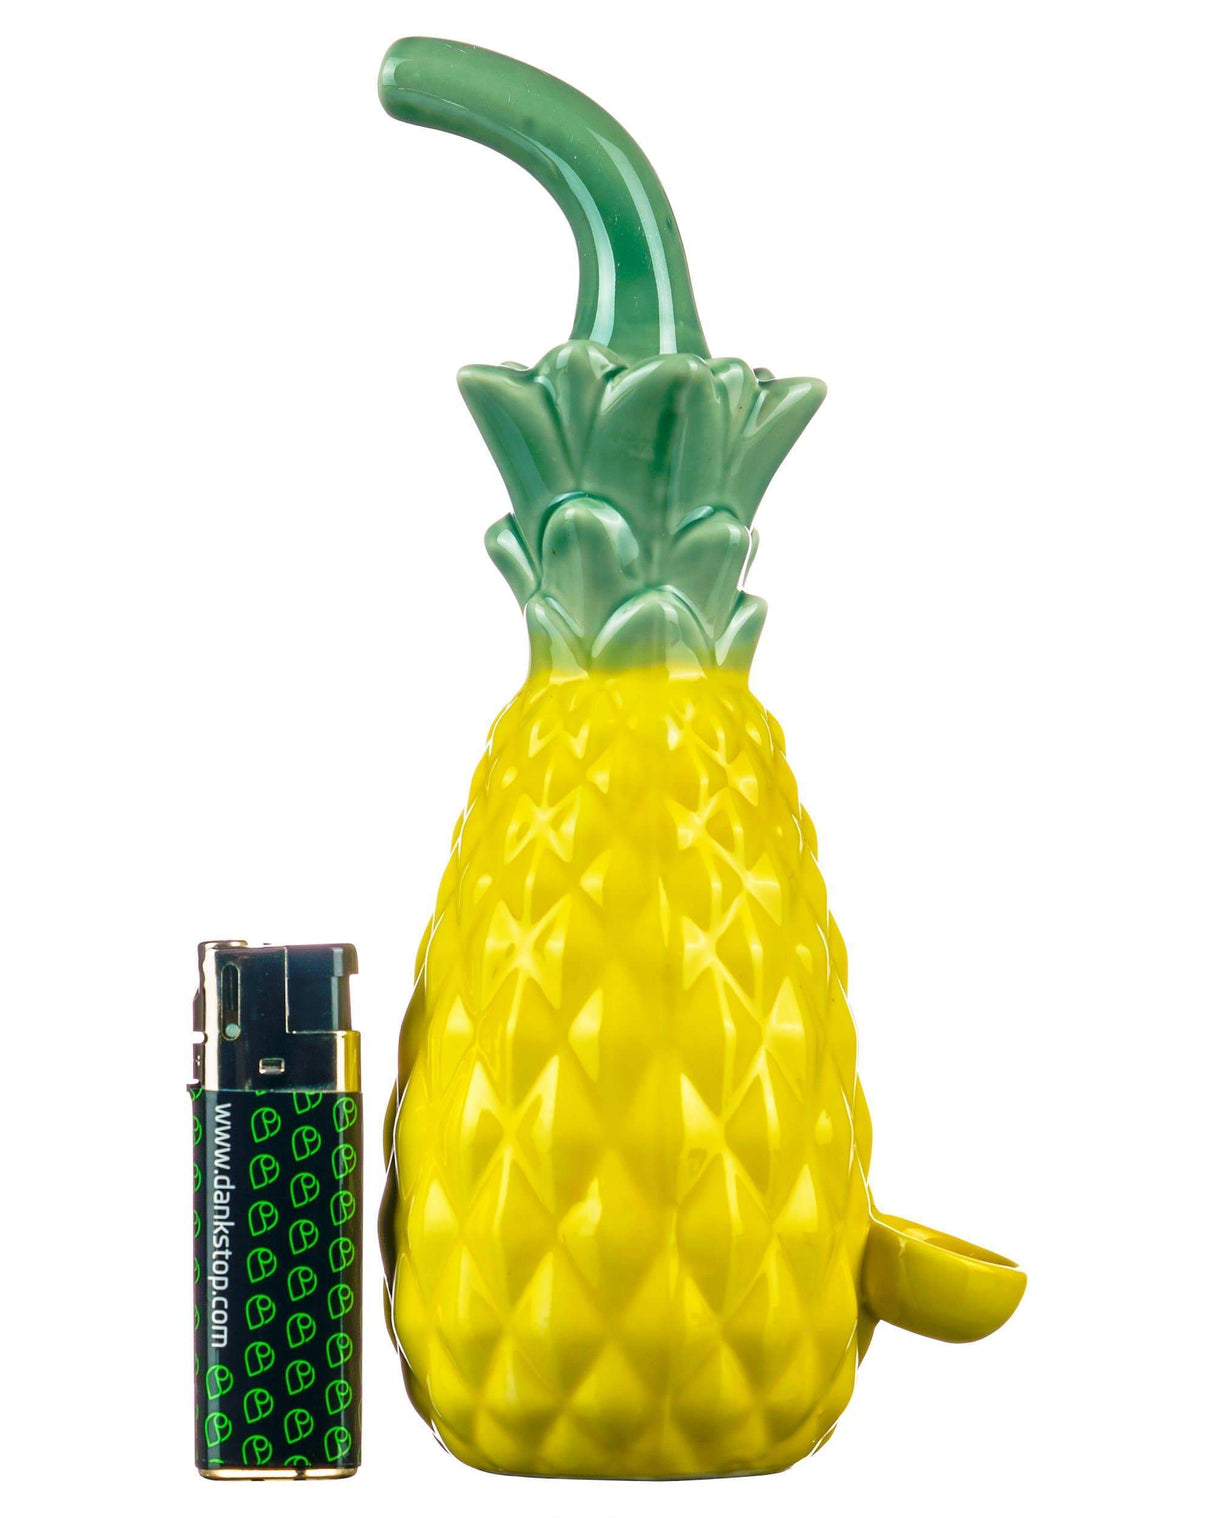 Roast & Toast Ceramic Pineapple Dry Pipe in Yellow & Green with Lighter for Scale